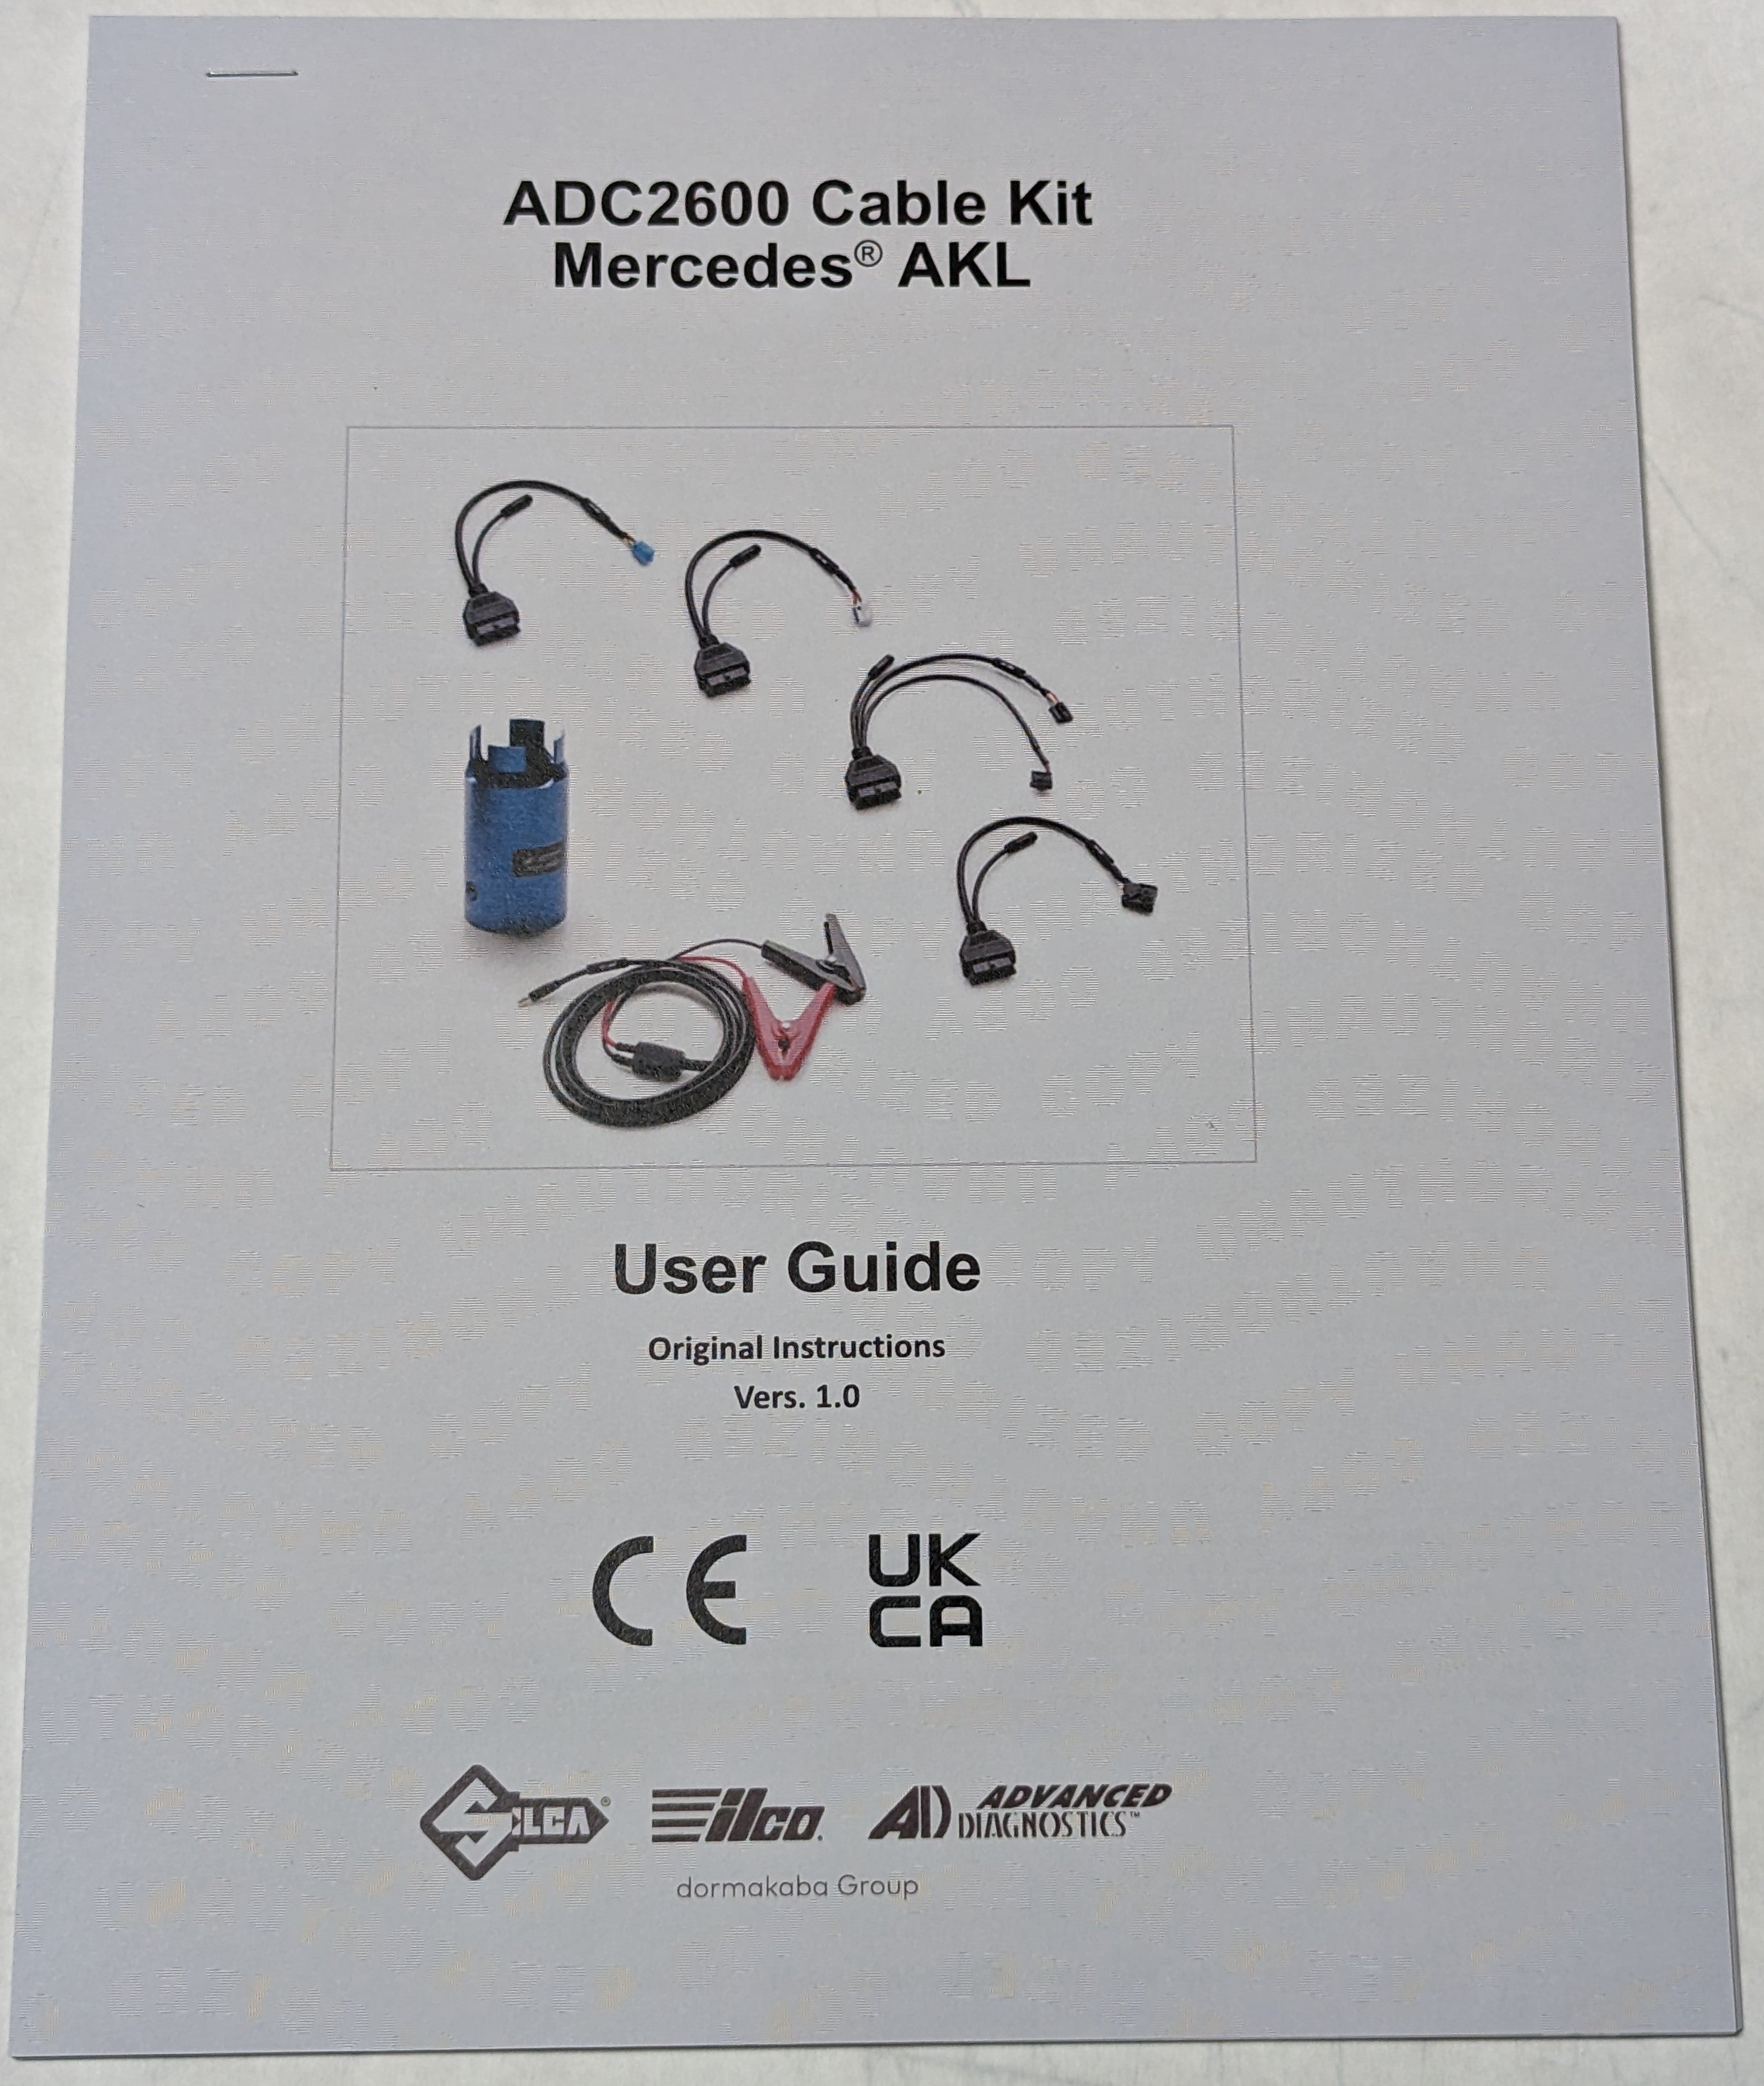 Mercedes Benz - All Keys Lost Cable Kit - Silca D756298AD - ILCO ADC2600 - Smart Pro required